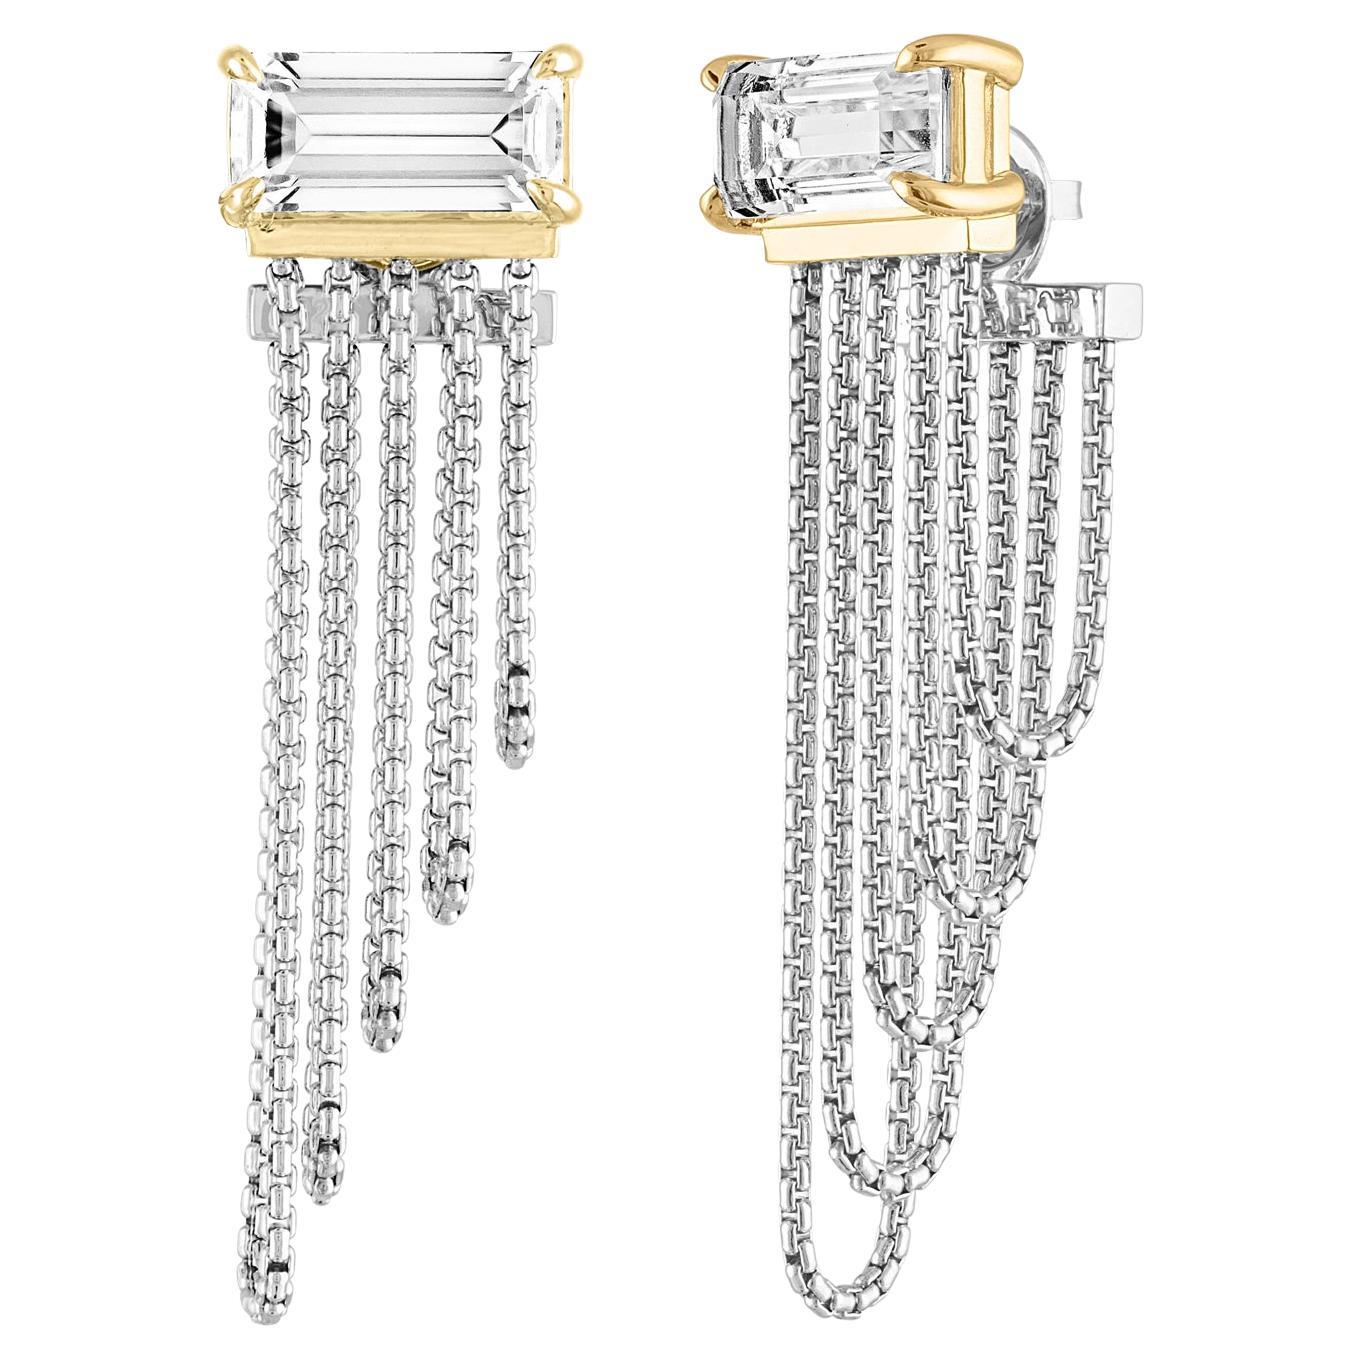 Light catching emerald cut rock crystals set in 18K gold sit atop looped lengths of sterling round box chain for a statement style that combines light, depth and movement. 18K posts and backings. Rock Crystals measure 15.4 X 7.4mm Made to order with